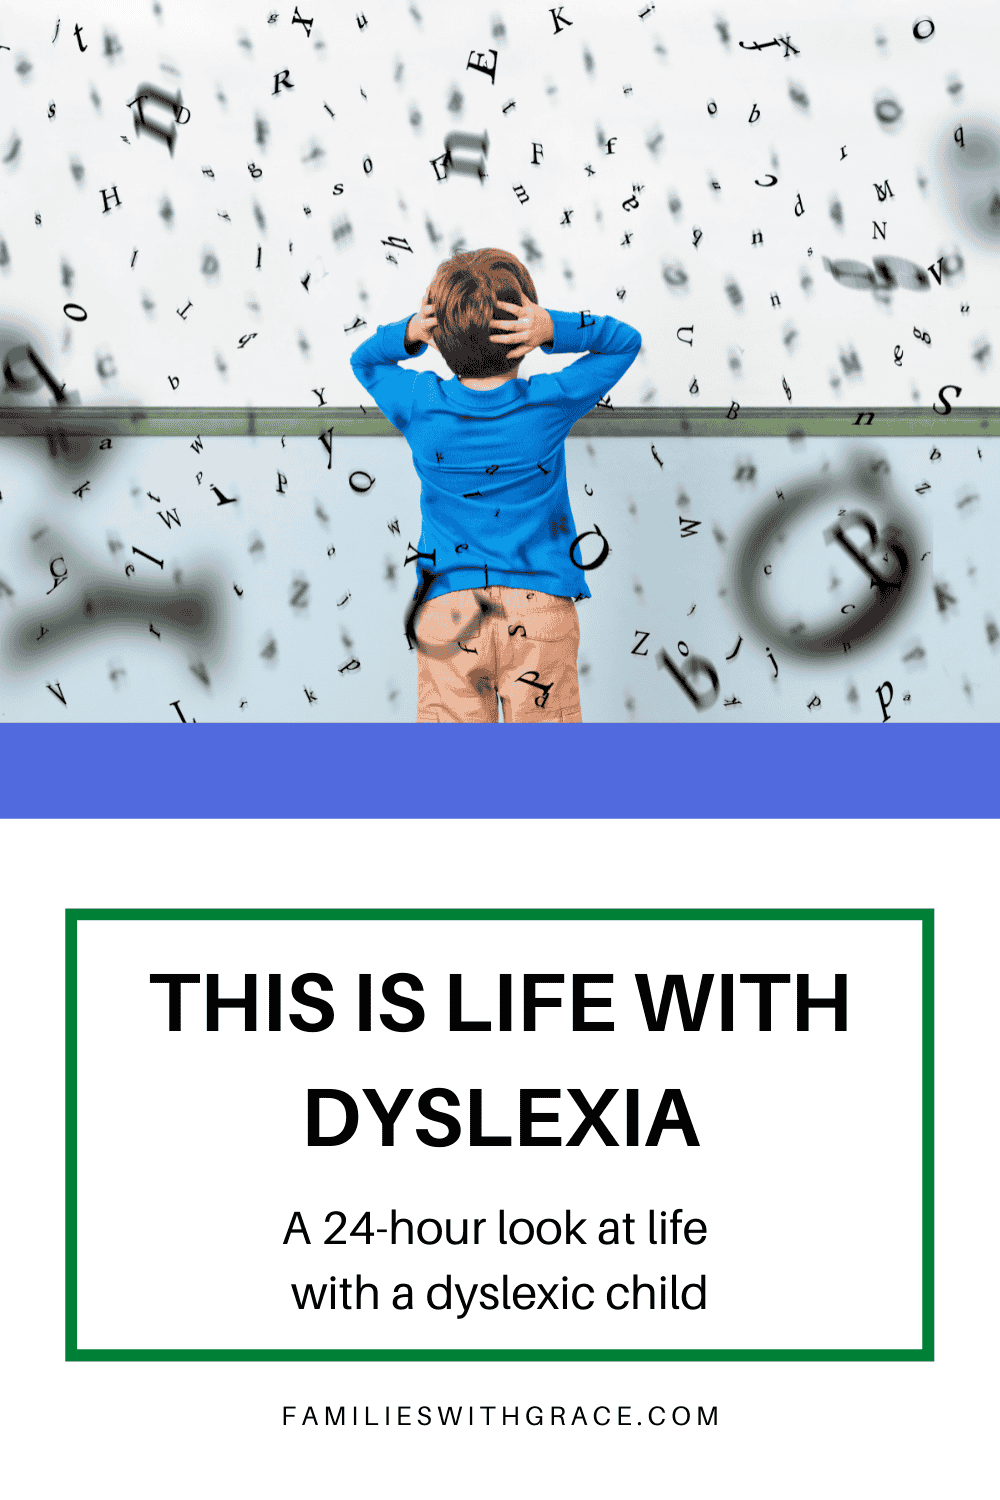 This is life with dyslexia